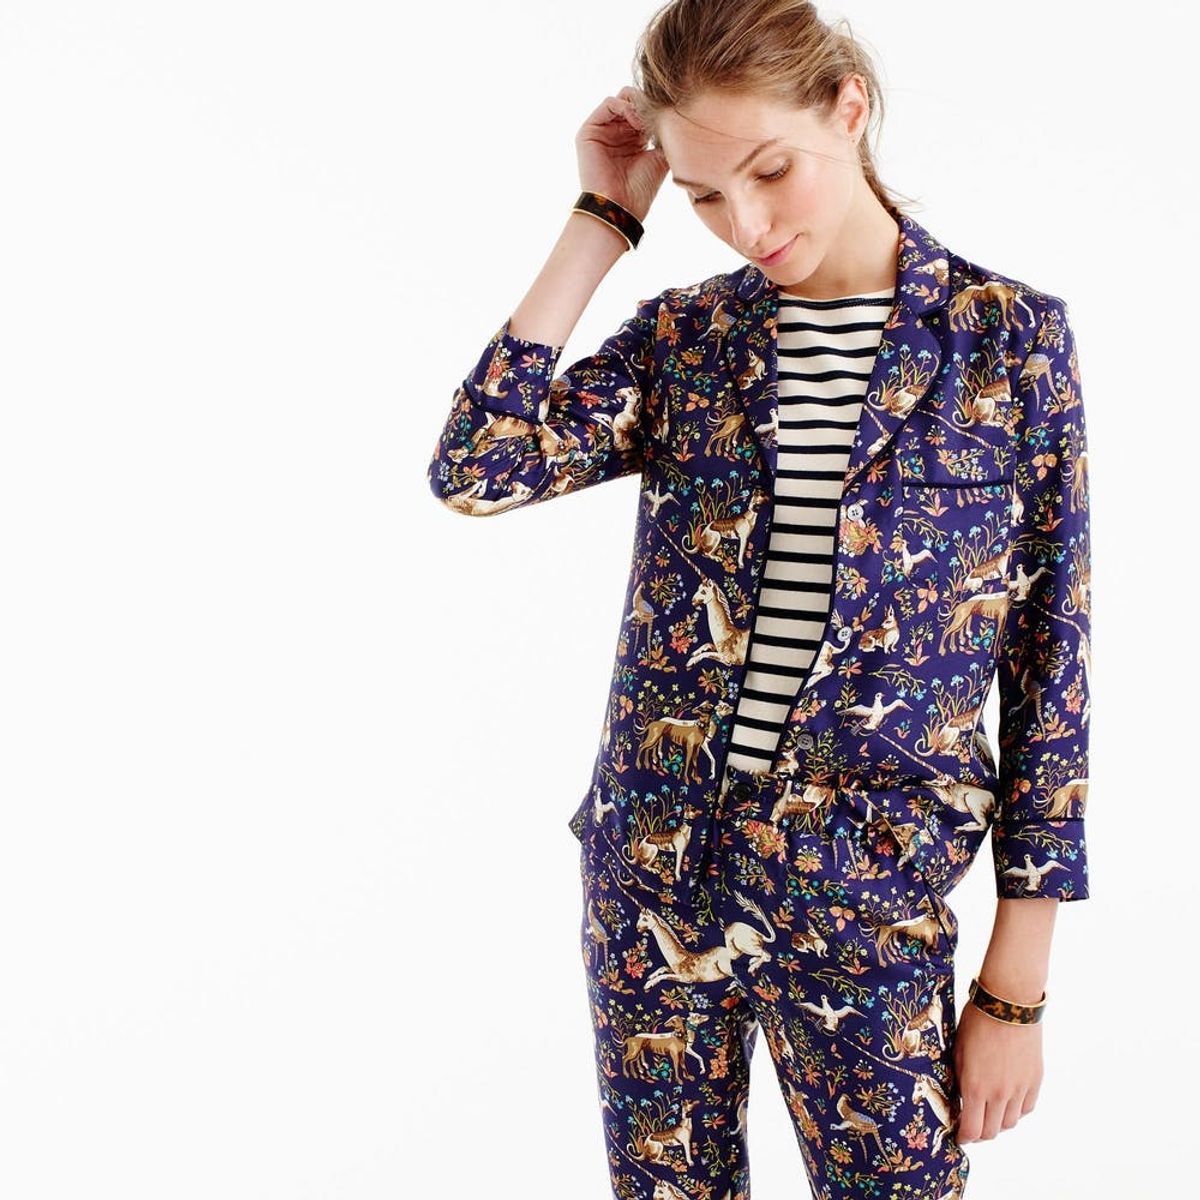 14 Ways to Rock the Pajama Trend Beyond the Bedroom This Fall